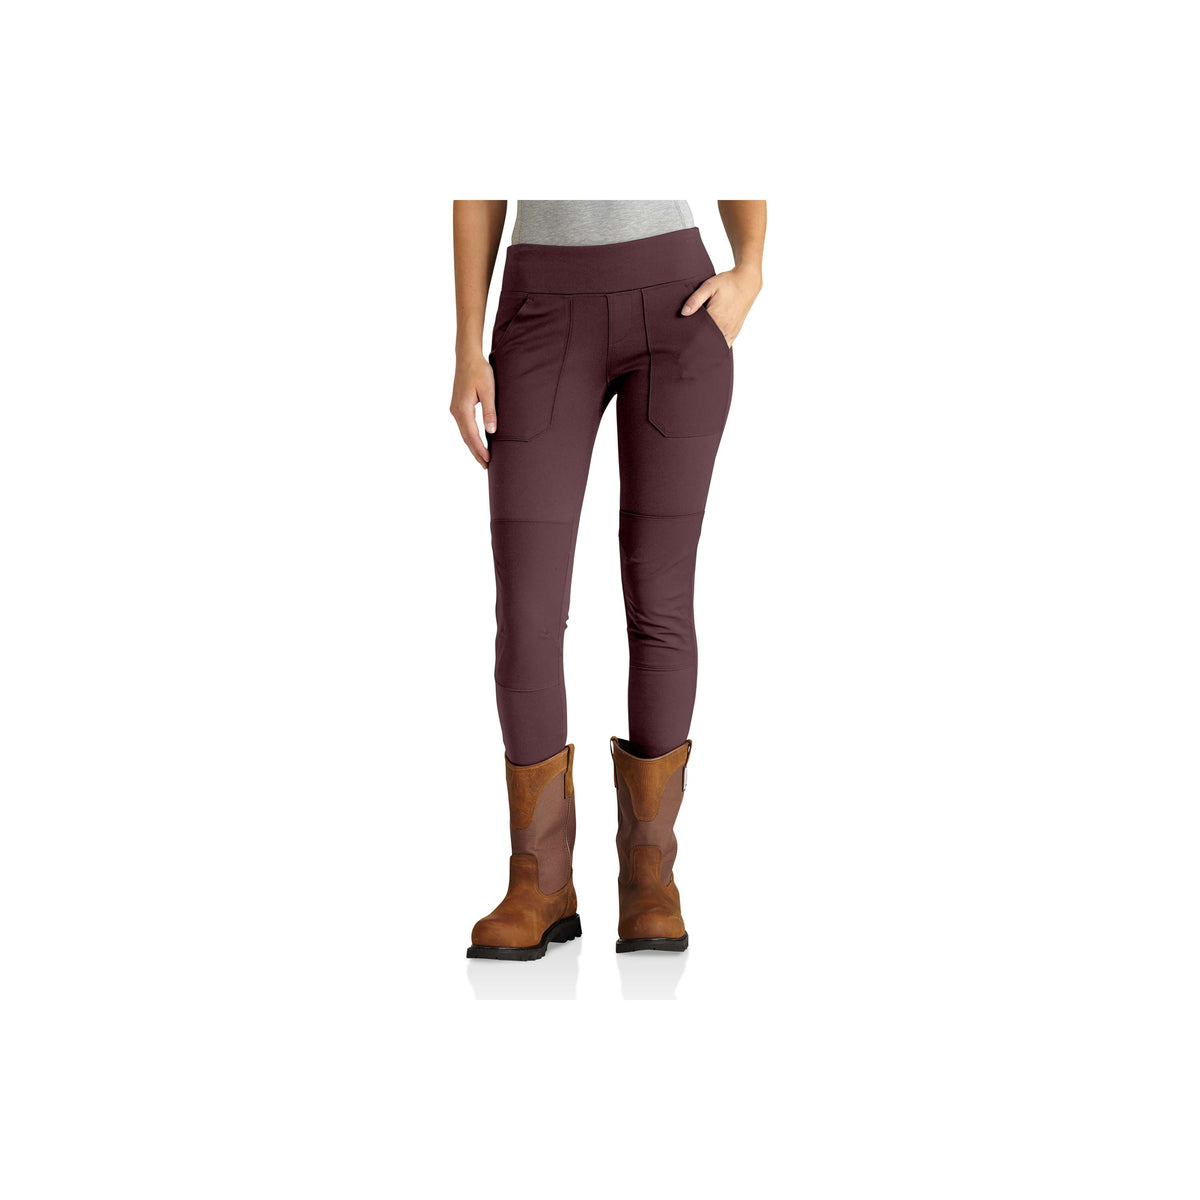 Carhartt Women's Force® Fitted Heavyweight Lined Legging - 105020